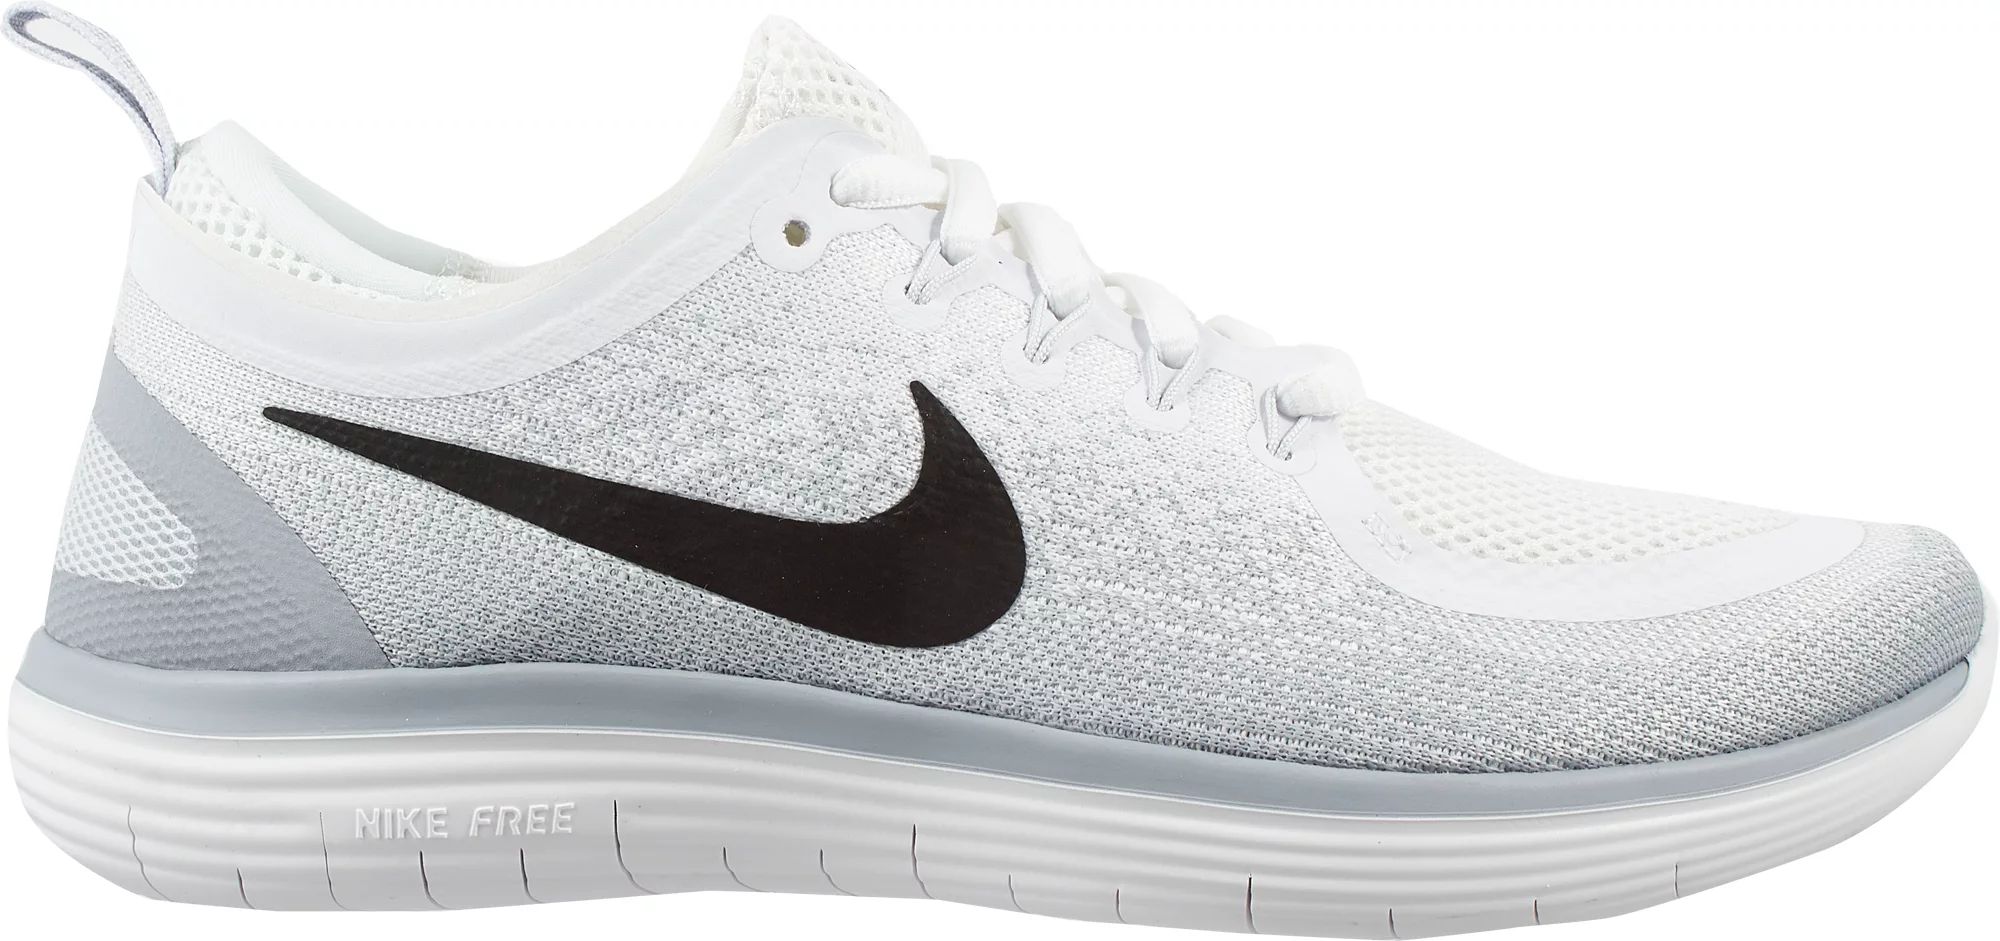 Nike Women's Free RN Distance 2 Running Shoes, Size: 6.0, White | Dick's Sporting Goods